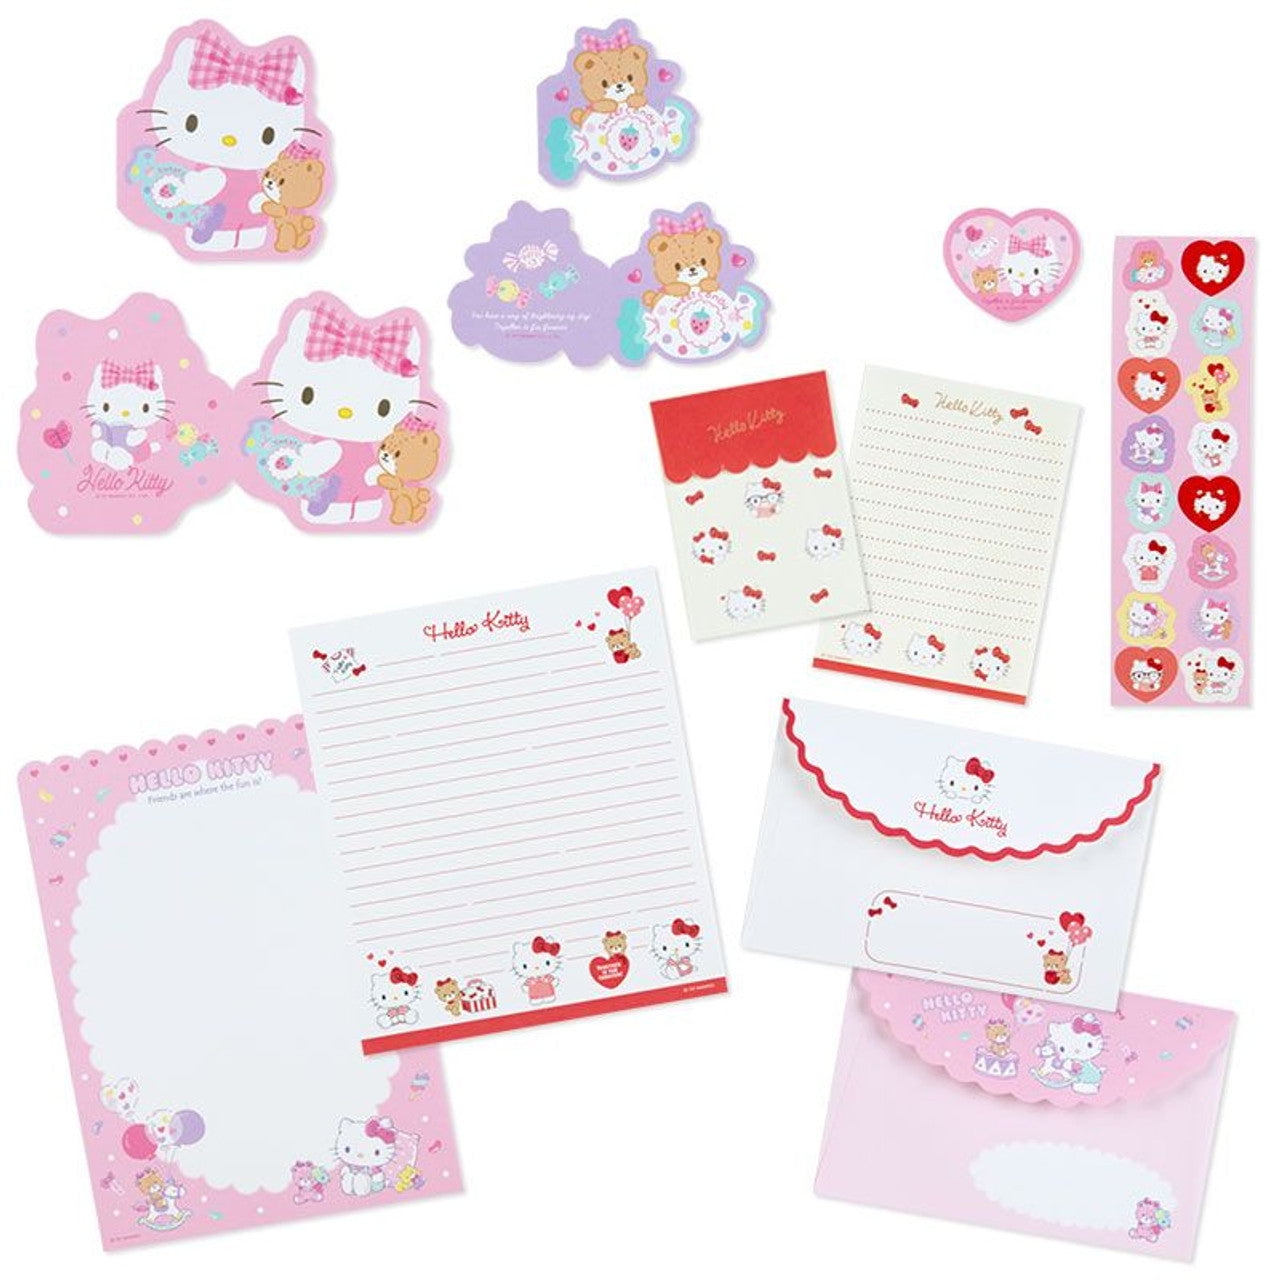 Wholesale hello kitty wholesale stationery With All Desktop